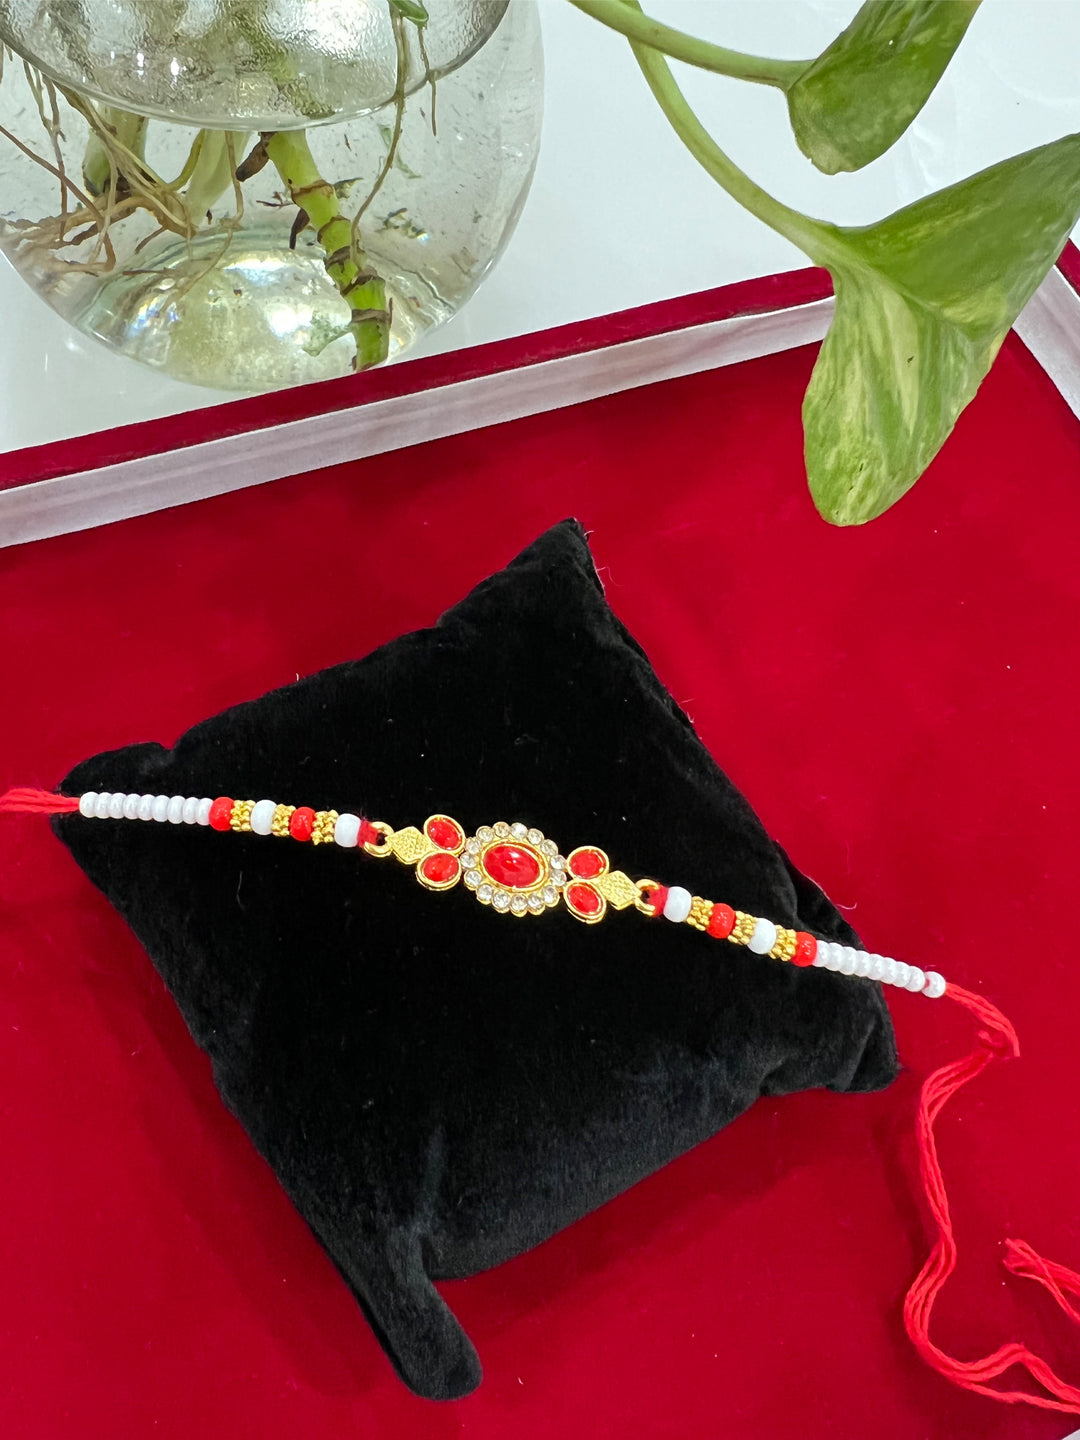 Red and White Pearl Thread Brother Rakhi